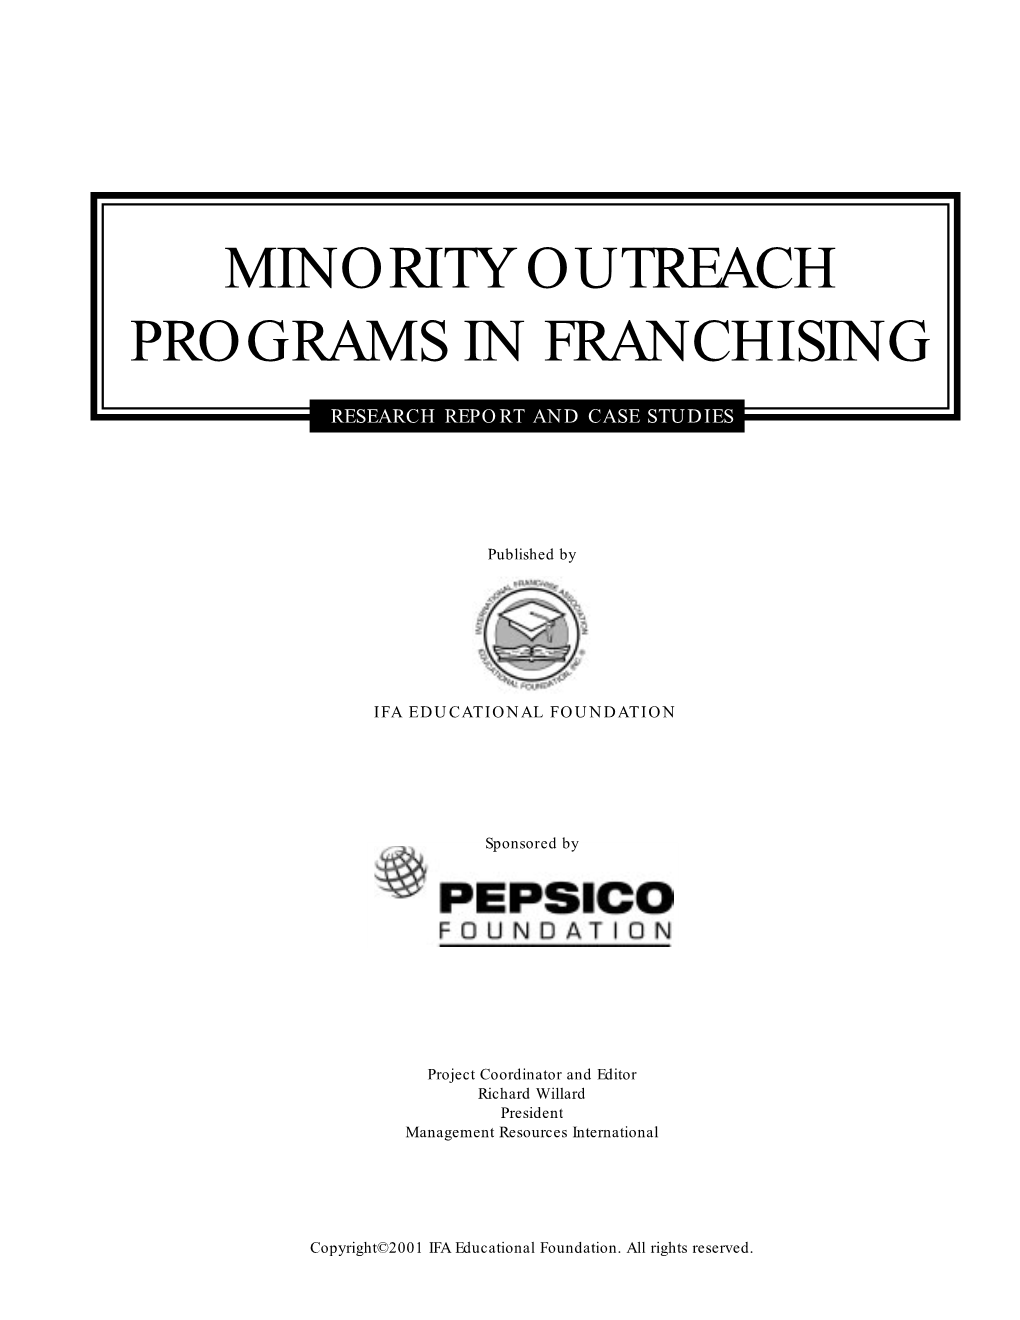 Minority Outreach Programs in Franchising